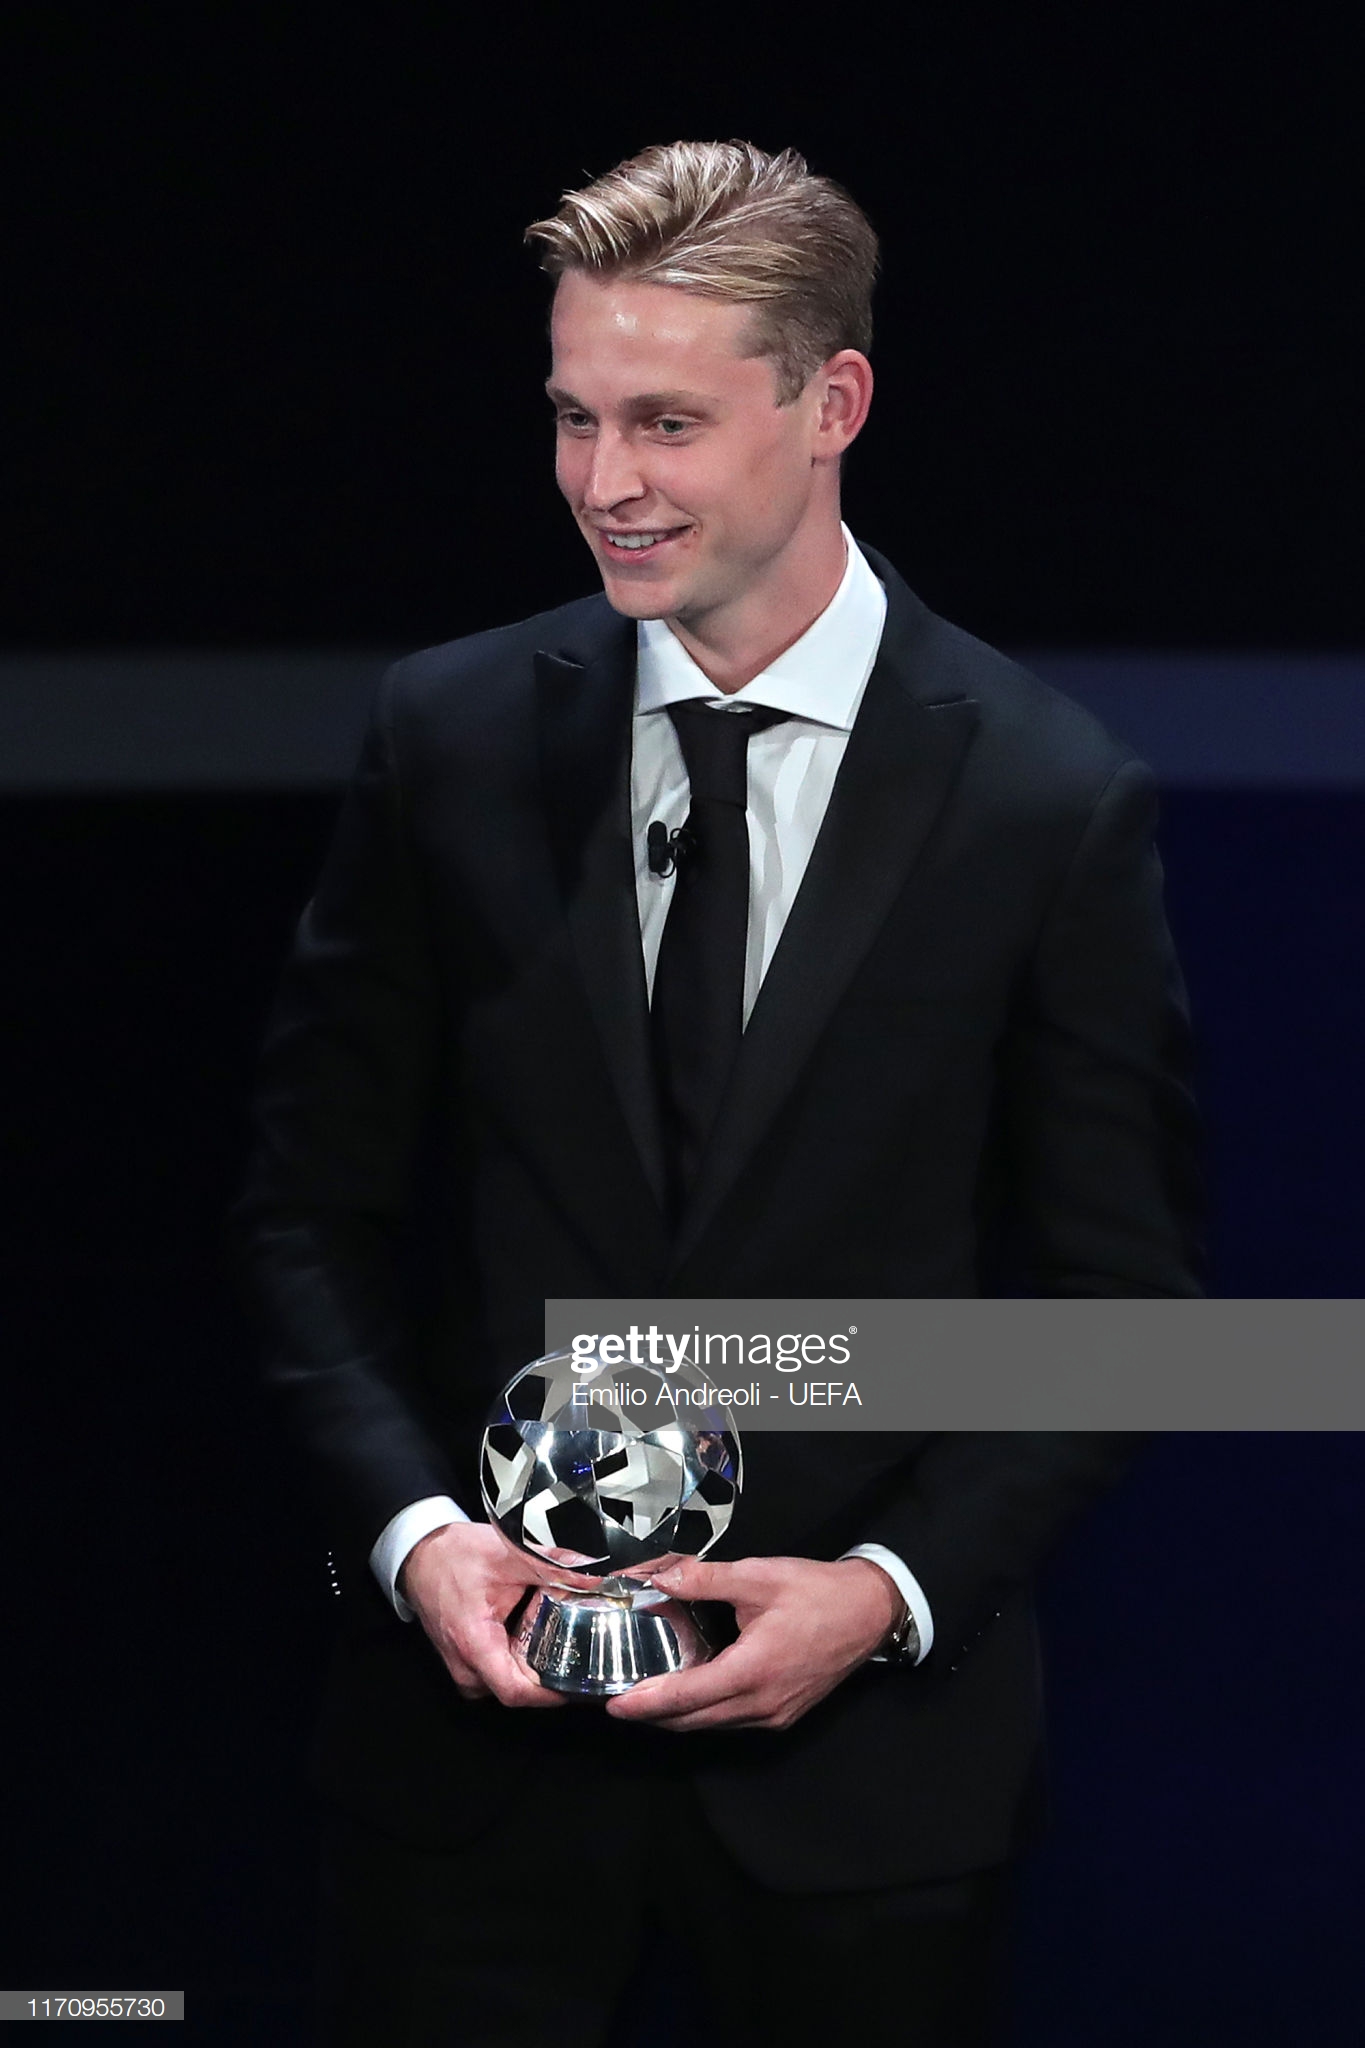 gettyimages-1170955730-2048x2048.jpg